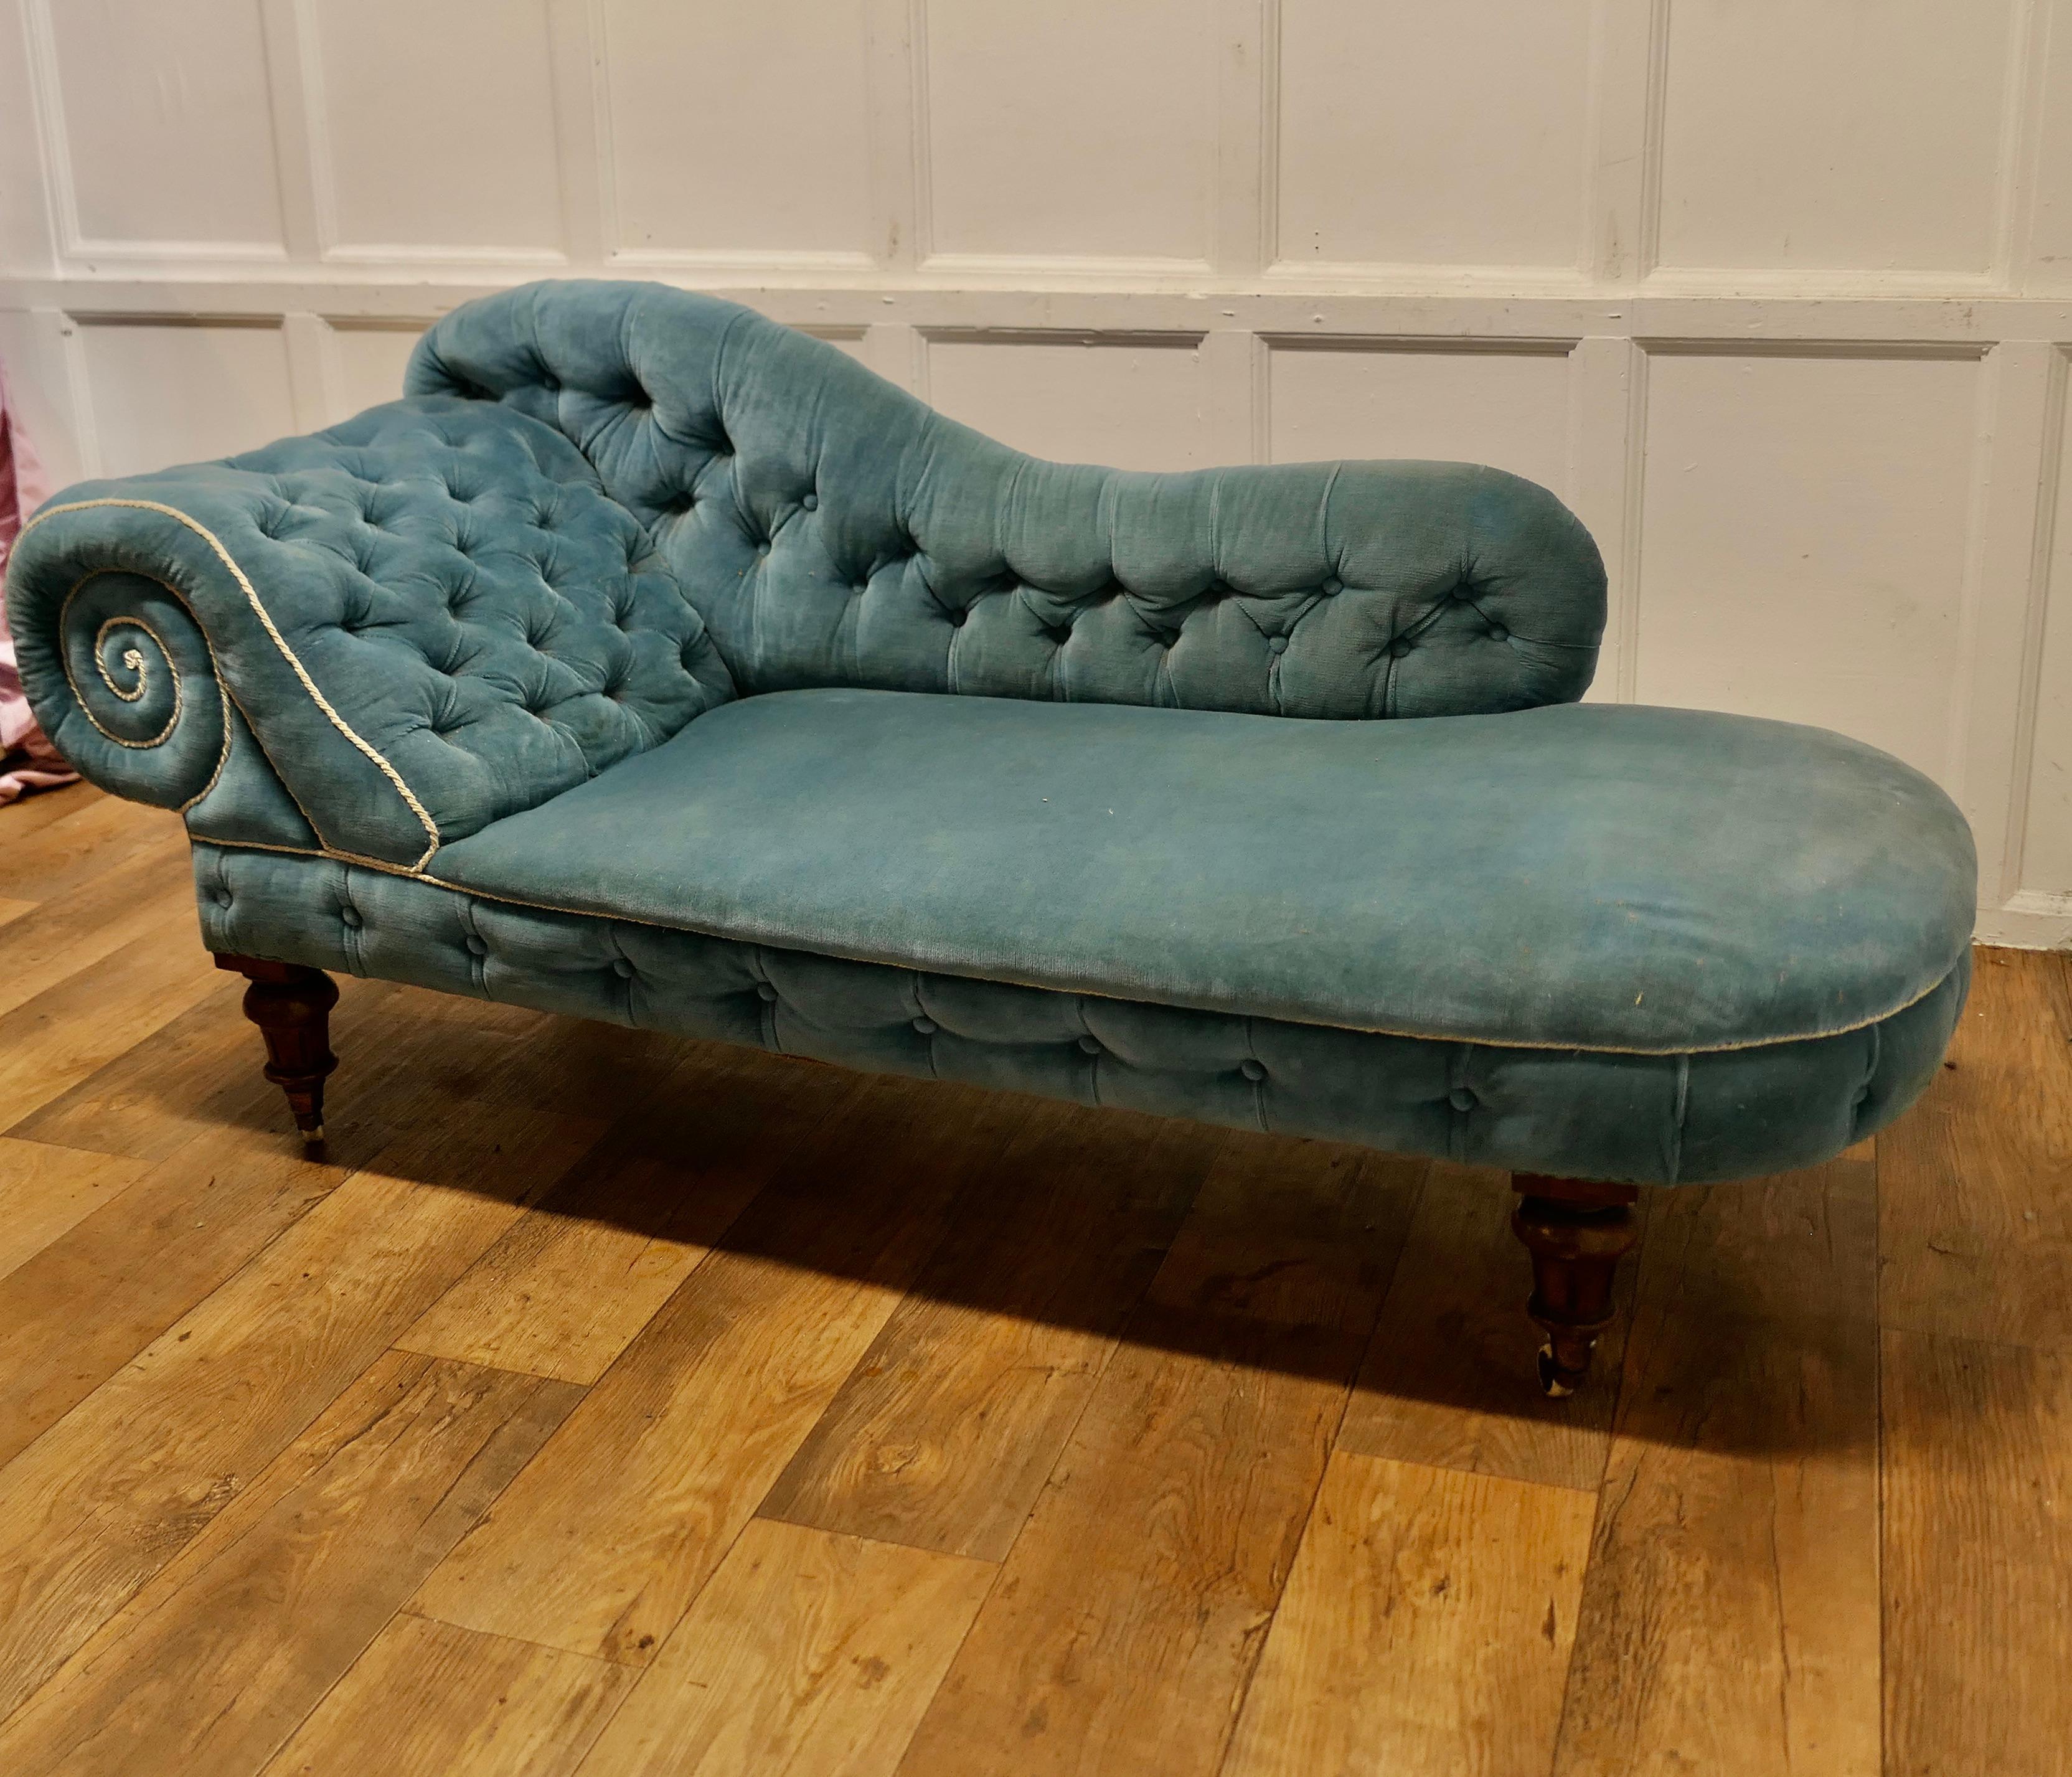 Very Stylish Victorian Velvet Chaise Longue or Day Bed

This is superb old sofa has an exaggerated swirl shaped back and head rest with deep buttoning, the back is also shaped and buttoned, it stands on chunky turned legs with castors, 
The Settee